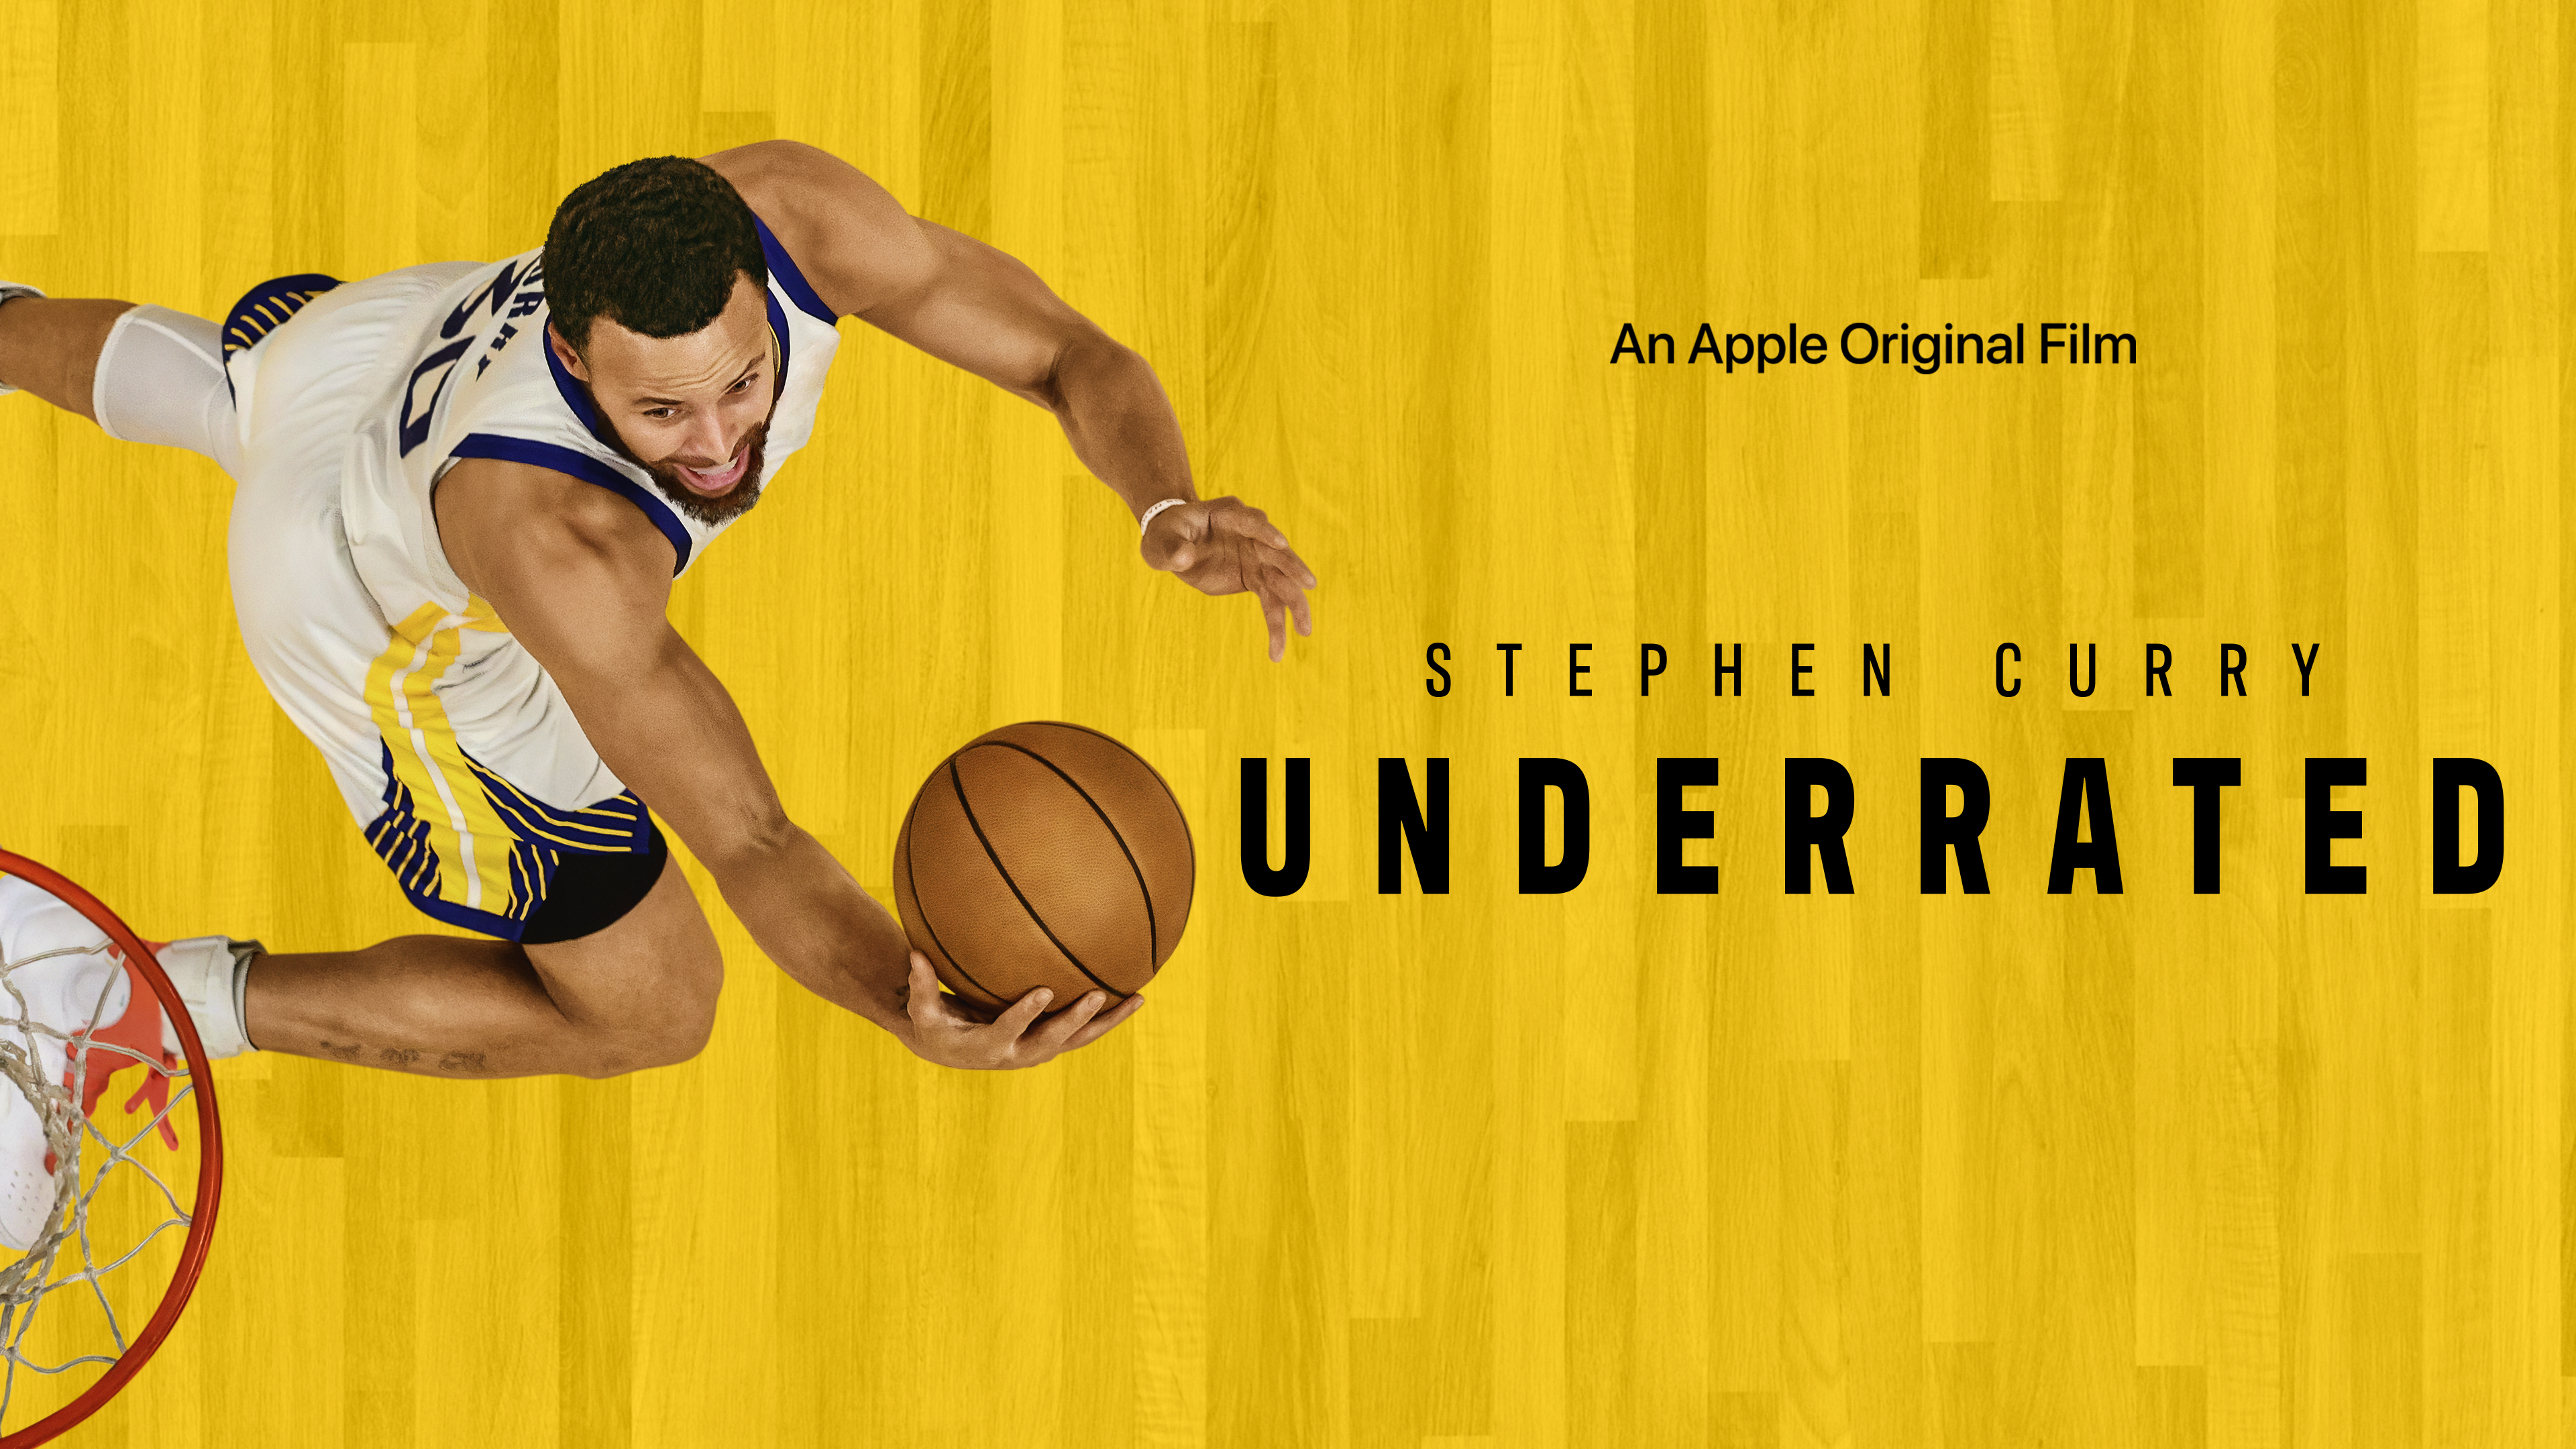 Artists & Partners: Stephen Curry